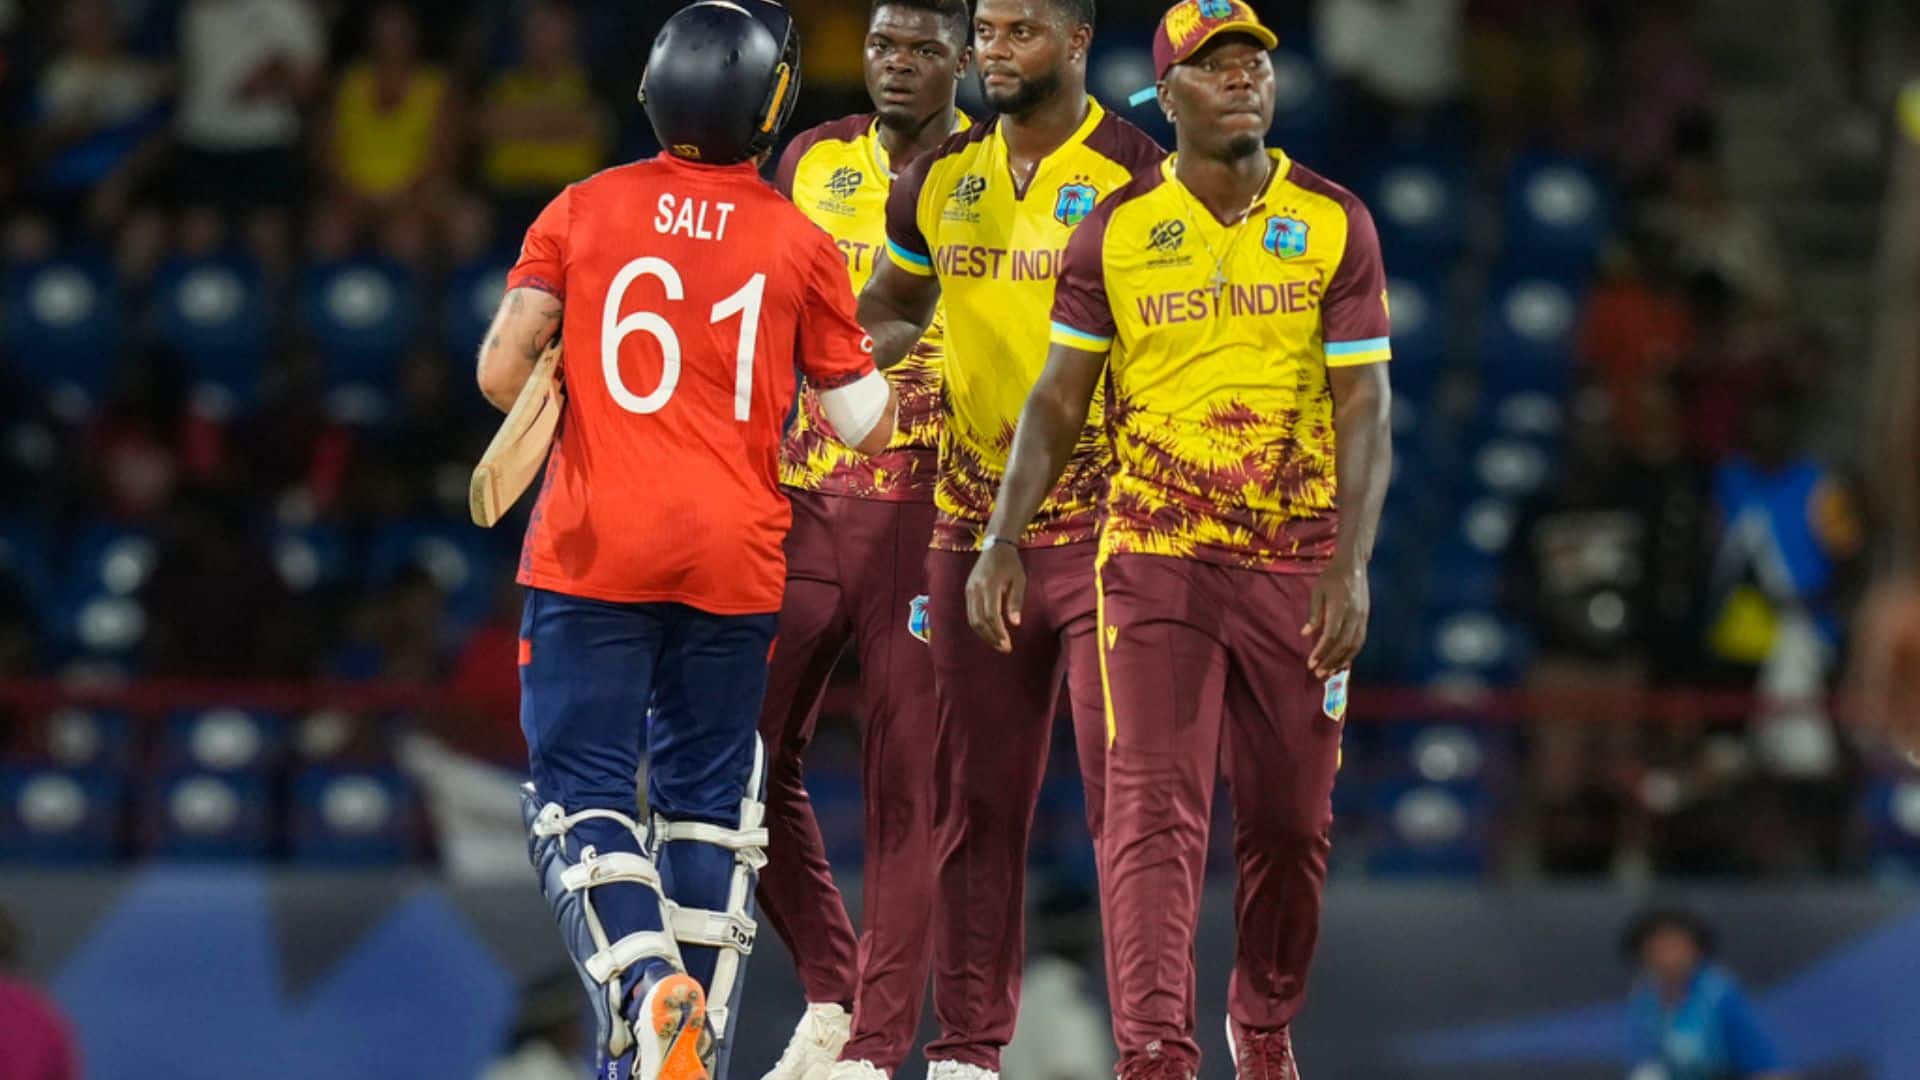 West Indies lost to England in their last game [AP]